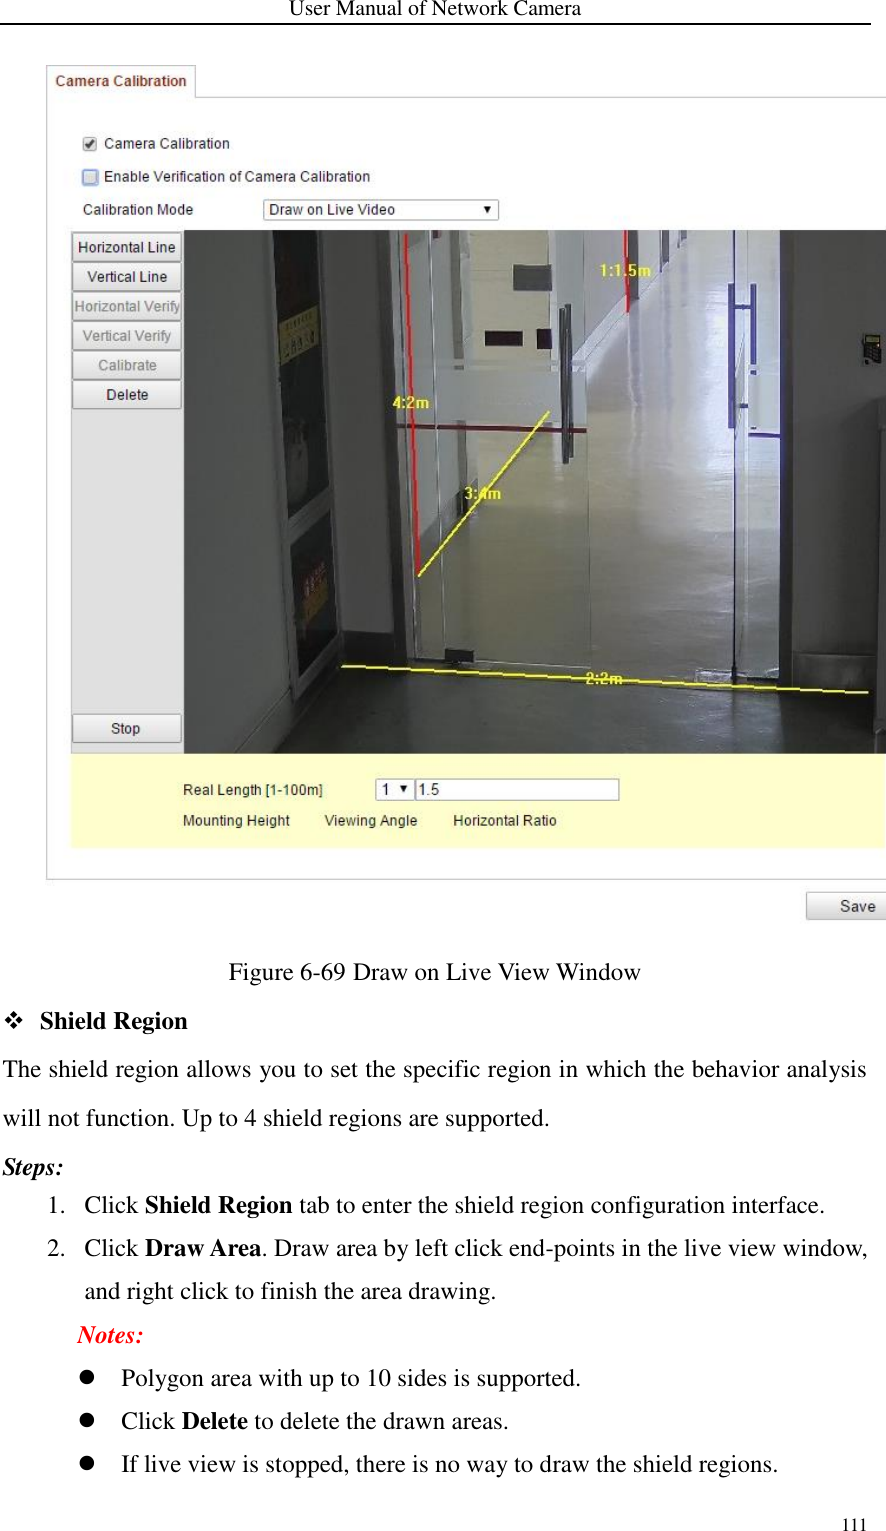 User Manual of Network Camera 111   Figure 6-69 Draw on Live View Window  Shield Region The shield region allows you to set the specific region in which the behavior analysis will not function. Up to 4 shield regions are supported. Steps: 1. Click Shield Region tab to enter the shield region configuration interface. 2. Click Draw Area. Draw area by left click end-points in the live view window, and right click to finish the area drawing.   Notes:  Polygon area with up to 10 sides is supported.    Click Delete to delete the drawn areas.  If live view is stopped, there is no way to draw the shield regions.   